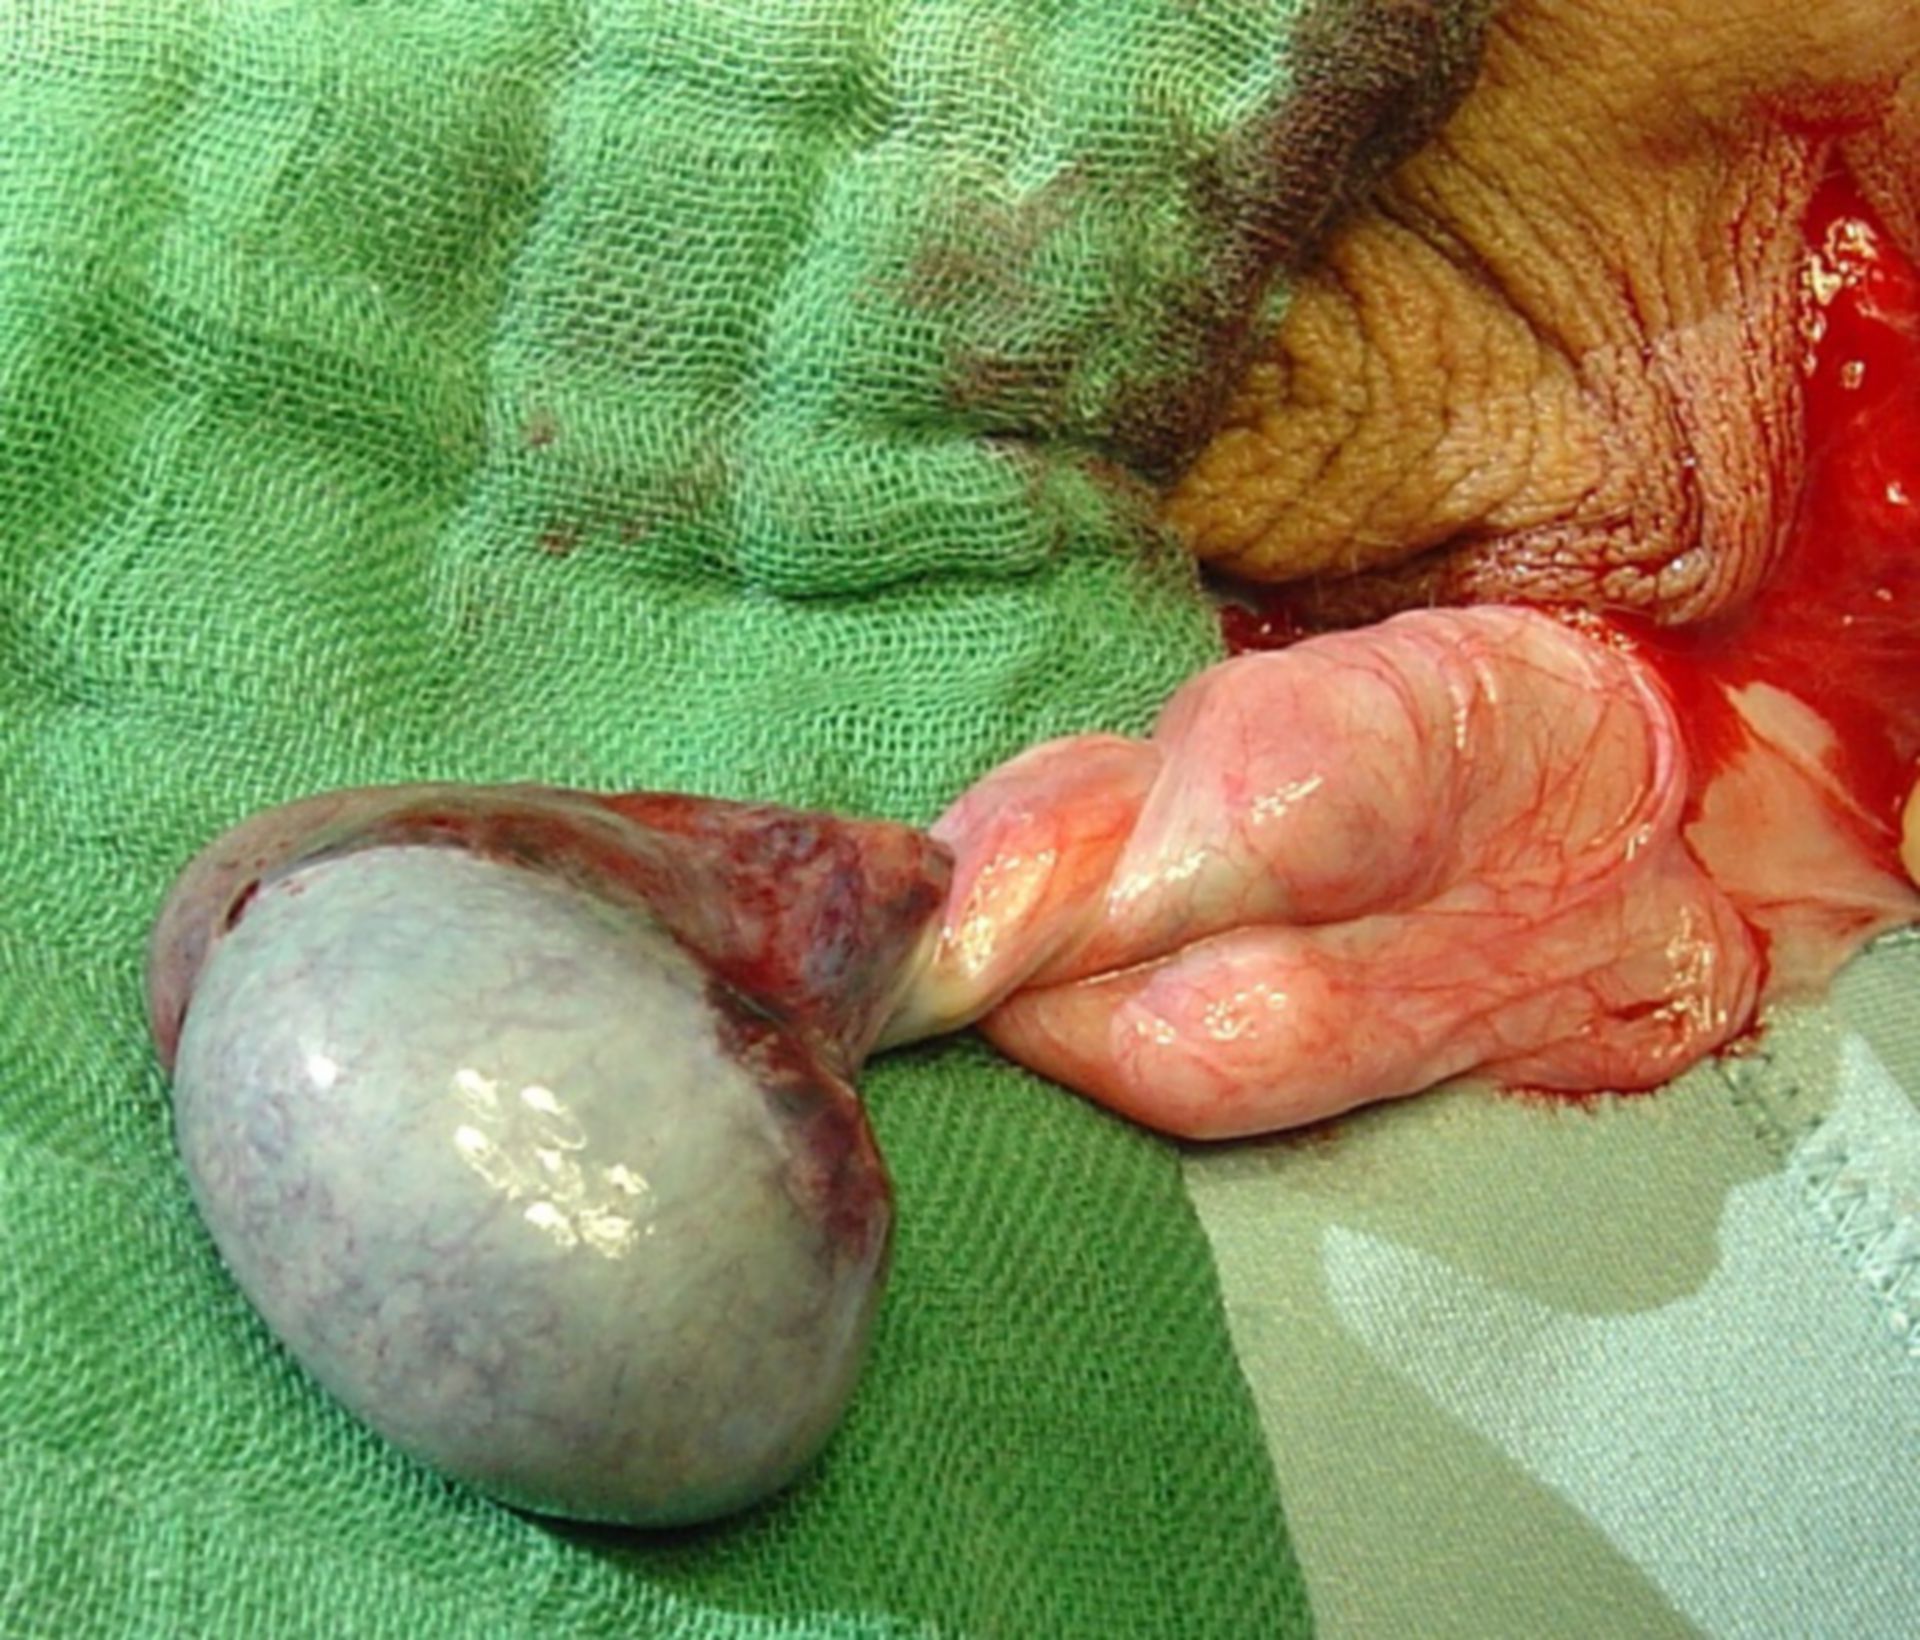 Intraoperative finding of a testicular torsion